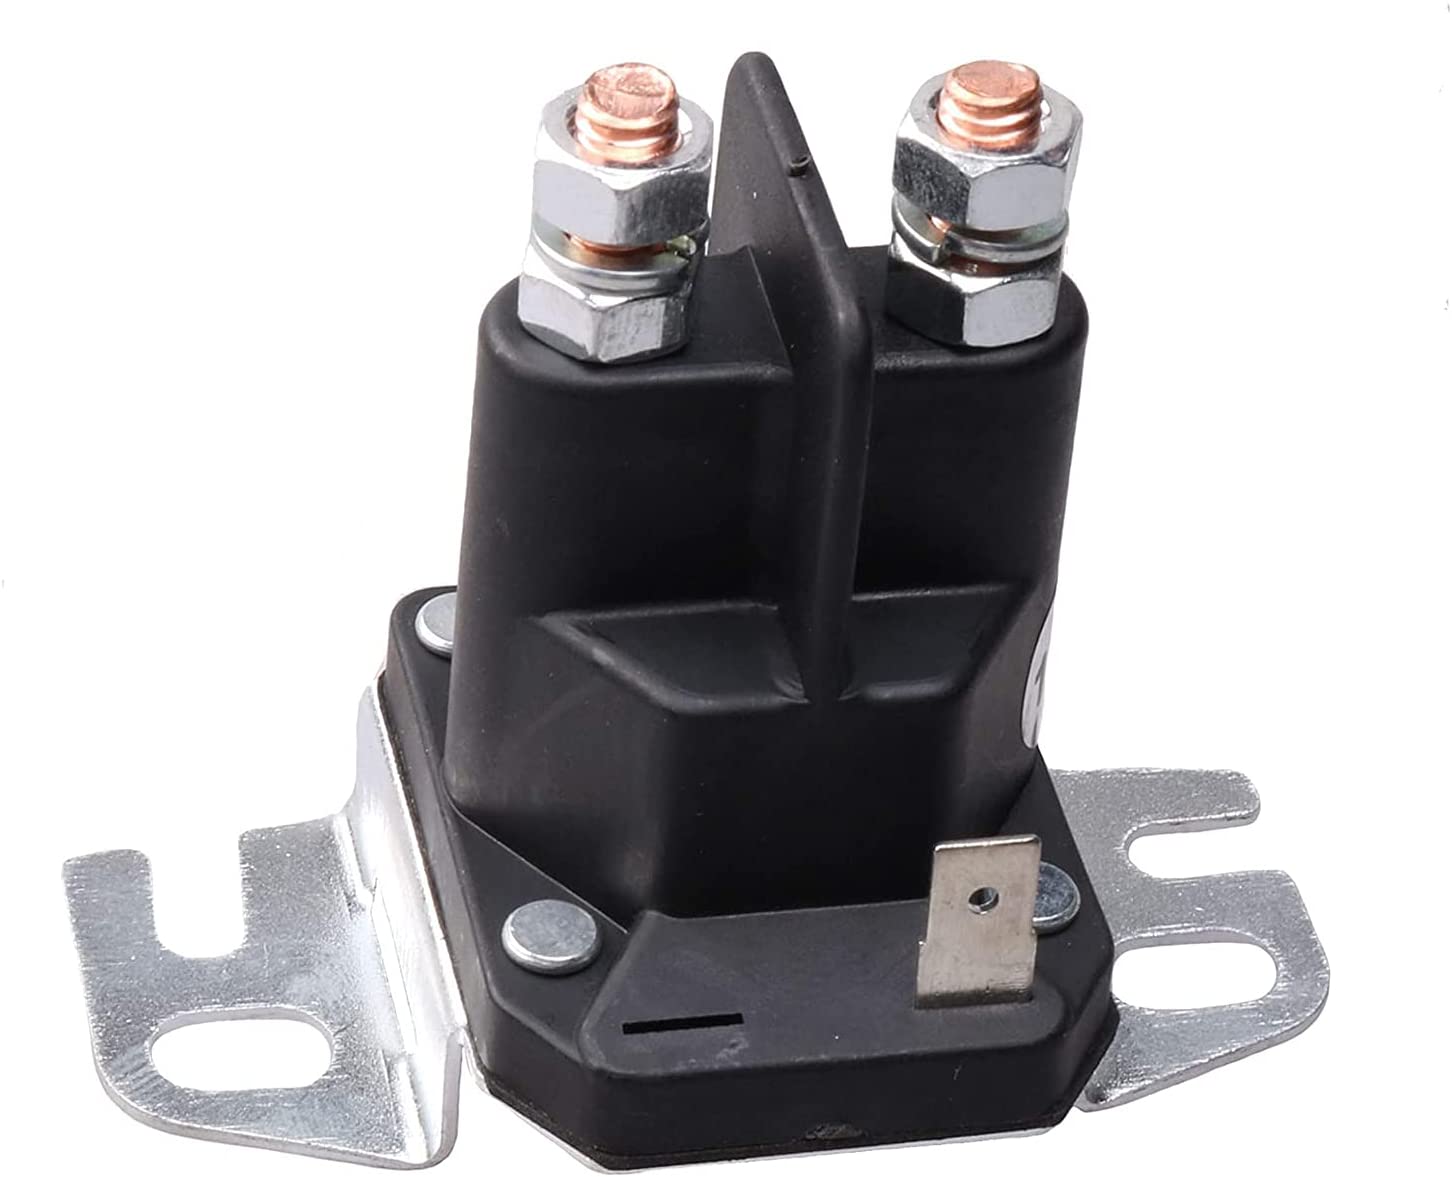 3-Terminals Starter Solenoid Relay Compatible with Briggs & Stratton 691656 846820 557067 807829 555375GS 745000 745000MA 745001 Trombetta 812-1201-211-05 93245-1 93245-2WR 12V 200/300A - KUDUPARTS